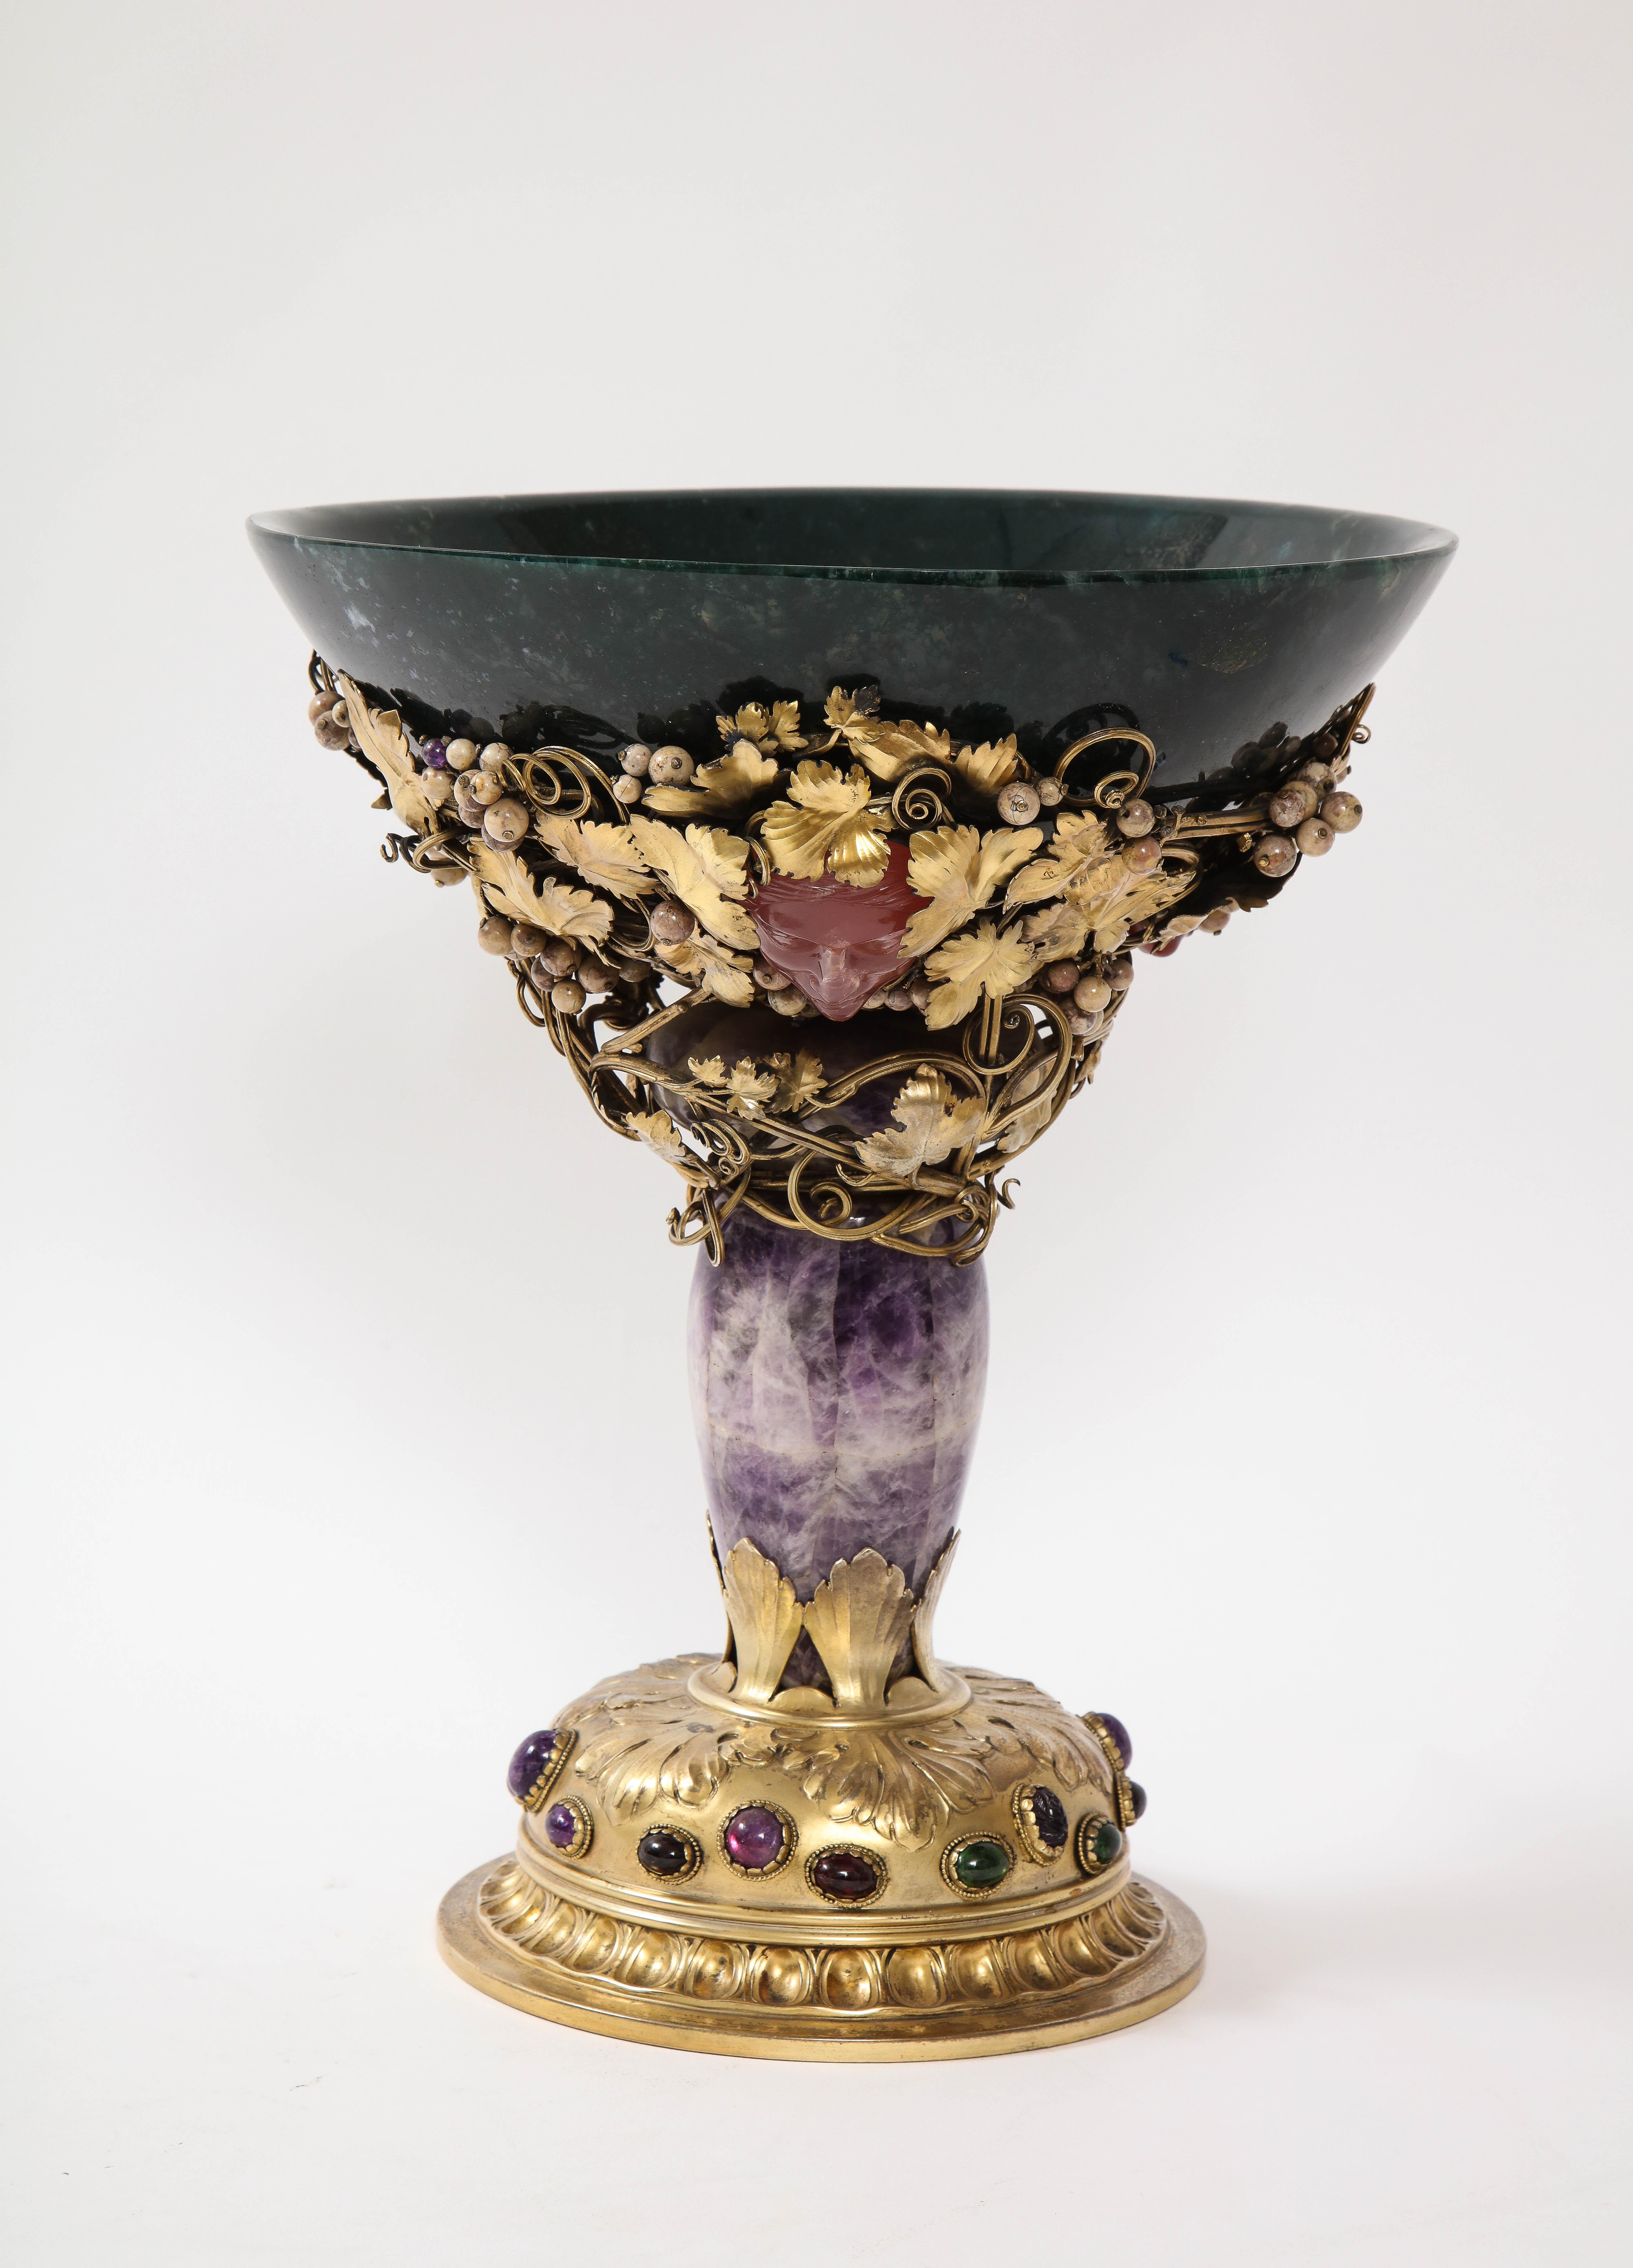 An important and unique 19th century Italian parcel-gilt silver mounted centerpiece consisting of multi semi-precious gem-stone including agate, Bloodstone Jasper, Amethyst, and others, attributed to Buccellati. This is truly a museum quality piece.